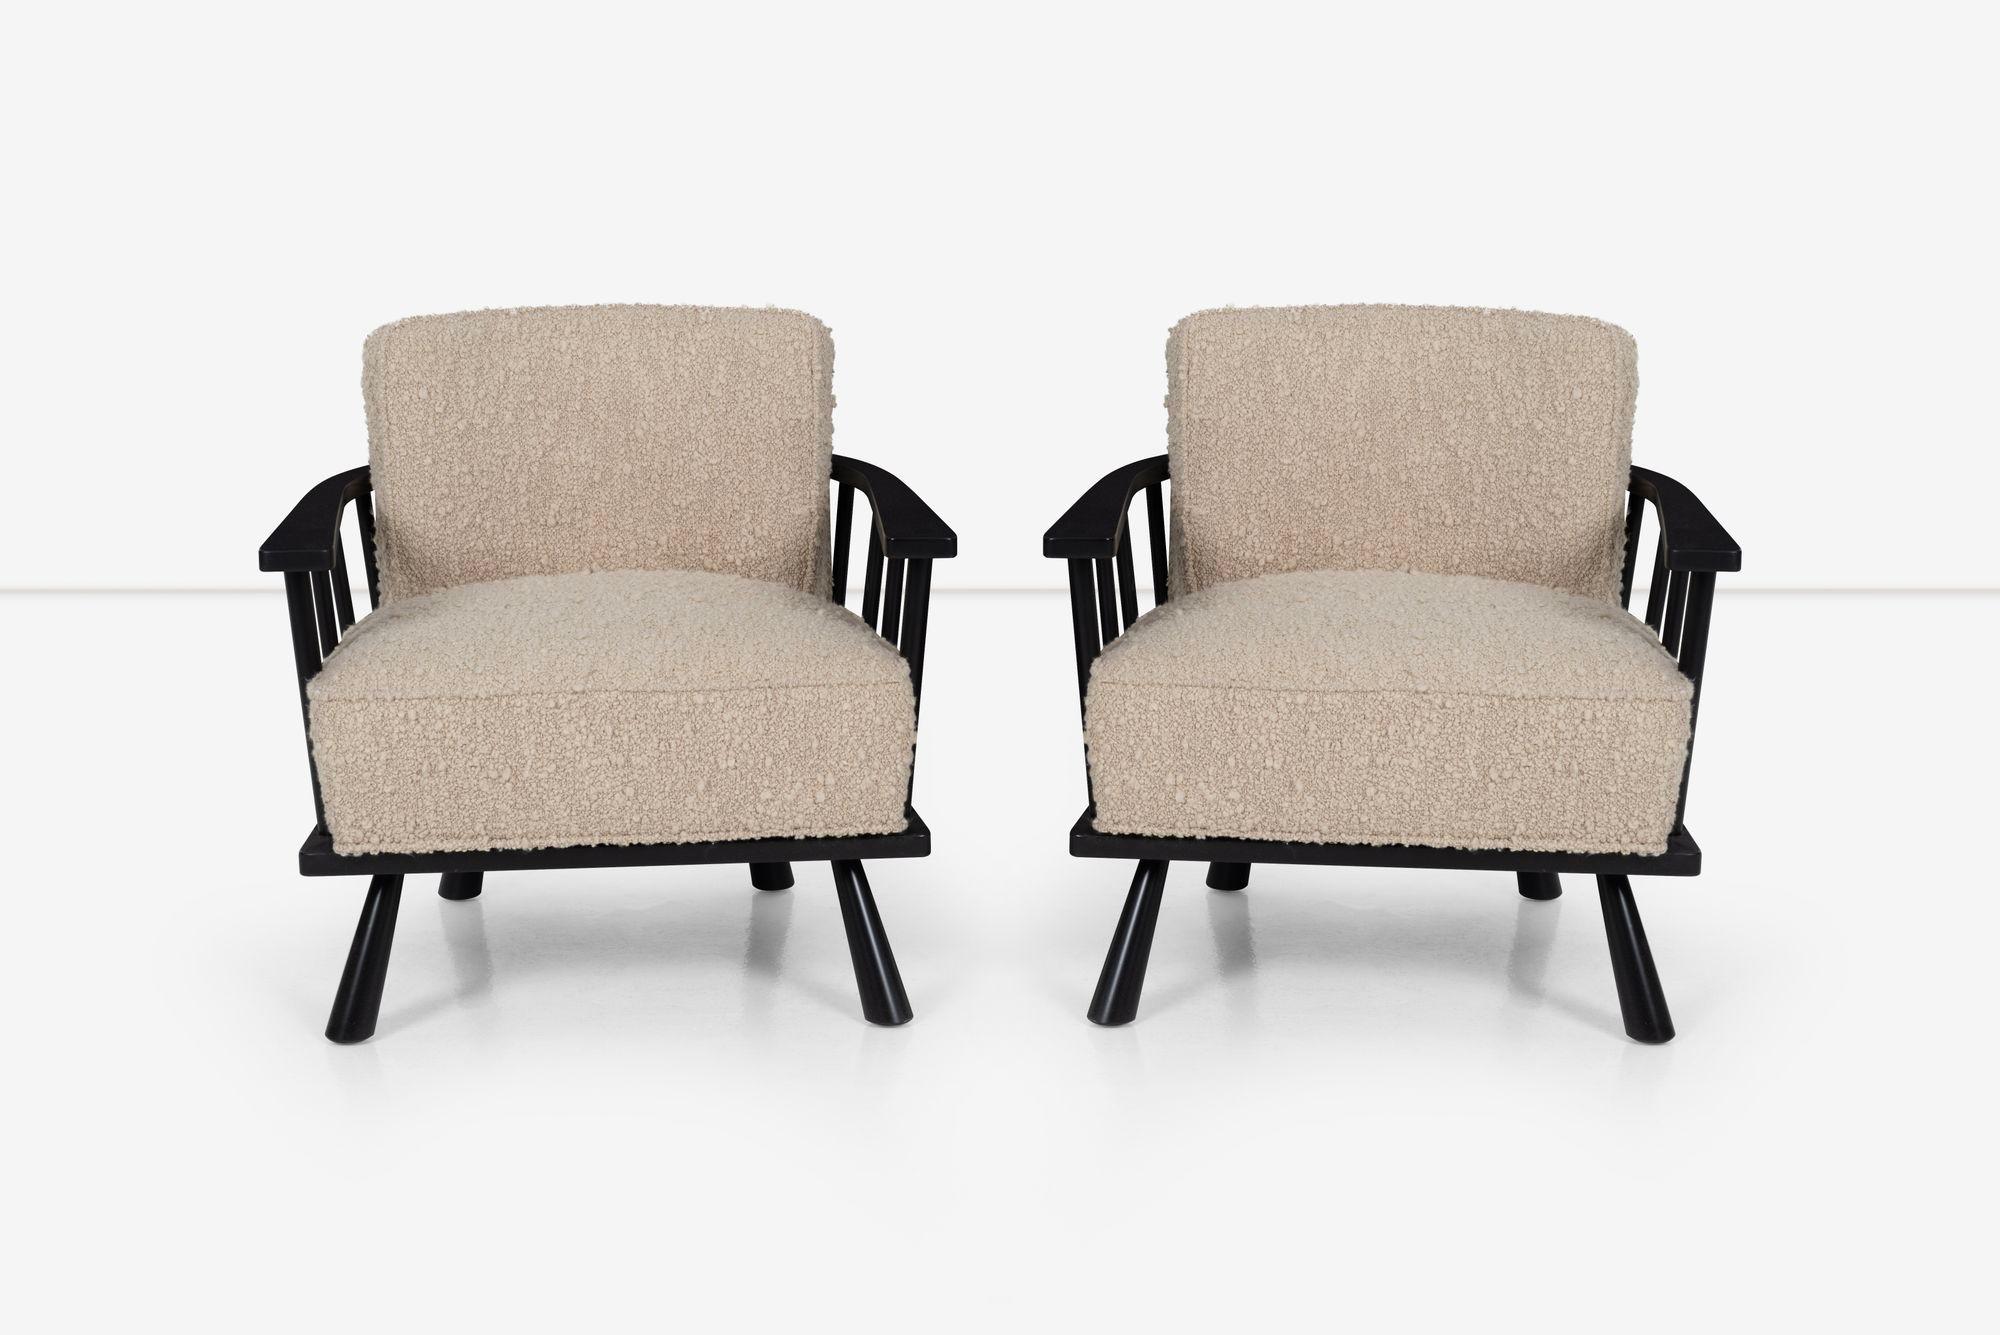 Pair of `T.H. Robsjohn-Gibbings Lounge Chairs for Widdicomb, model 1651
Black lacquer frames, reupholstered with Great Plains boucle. We decided not to add buttons for a clean minimal look but can add them at customers' request.
United Kingdom /